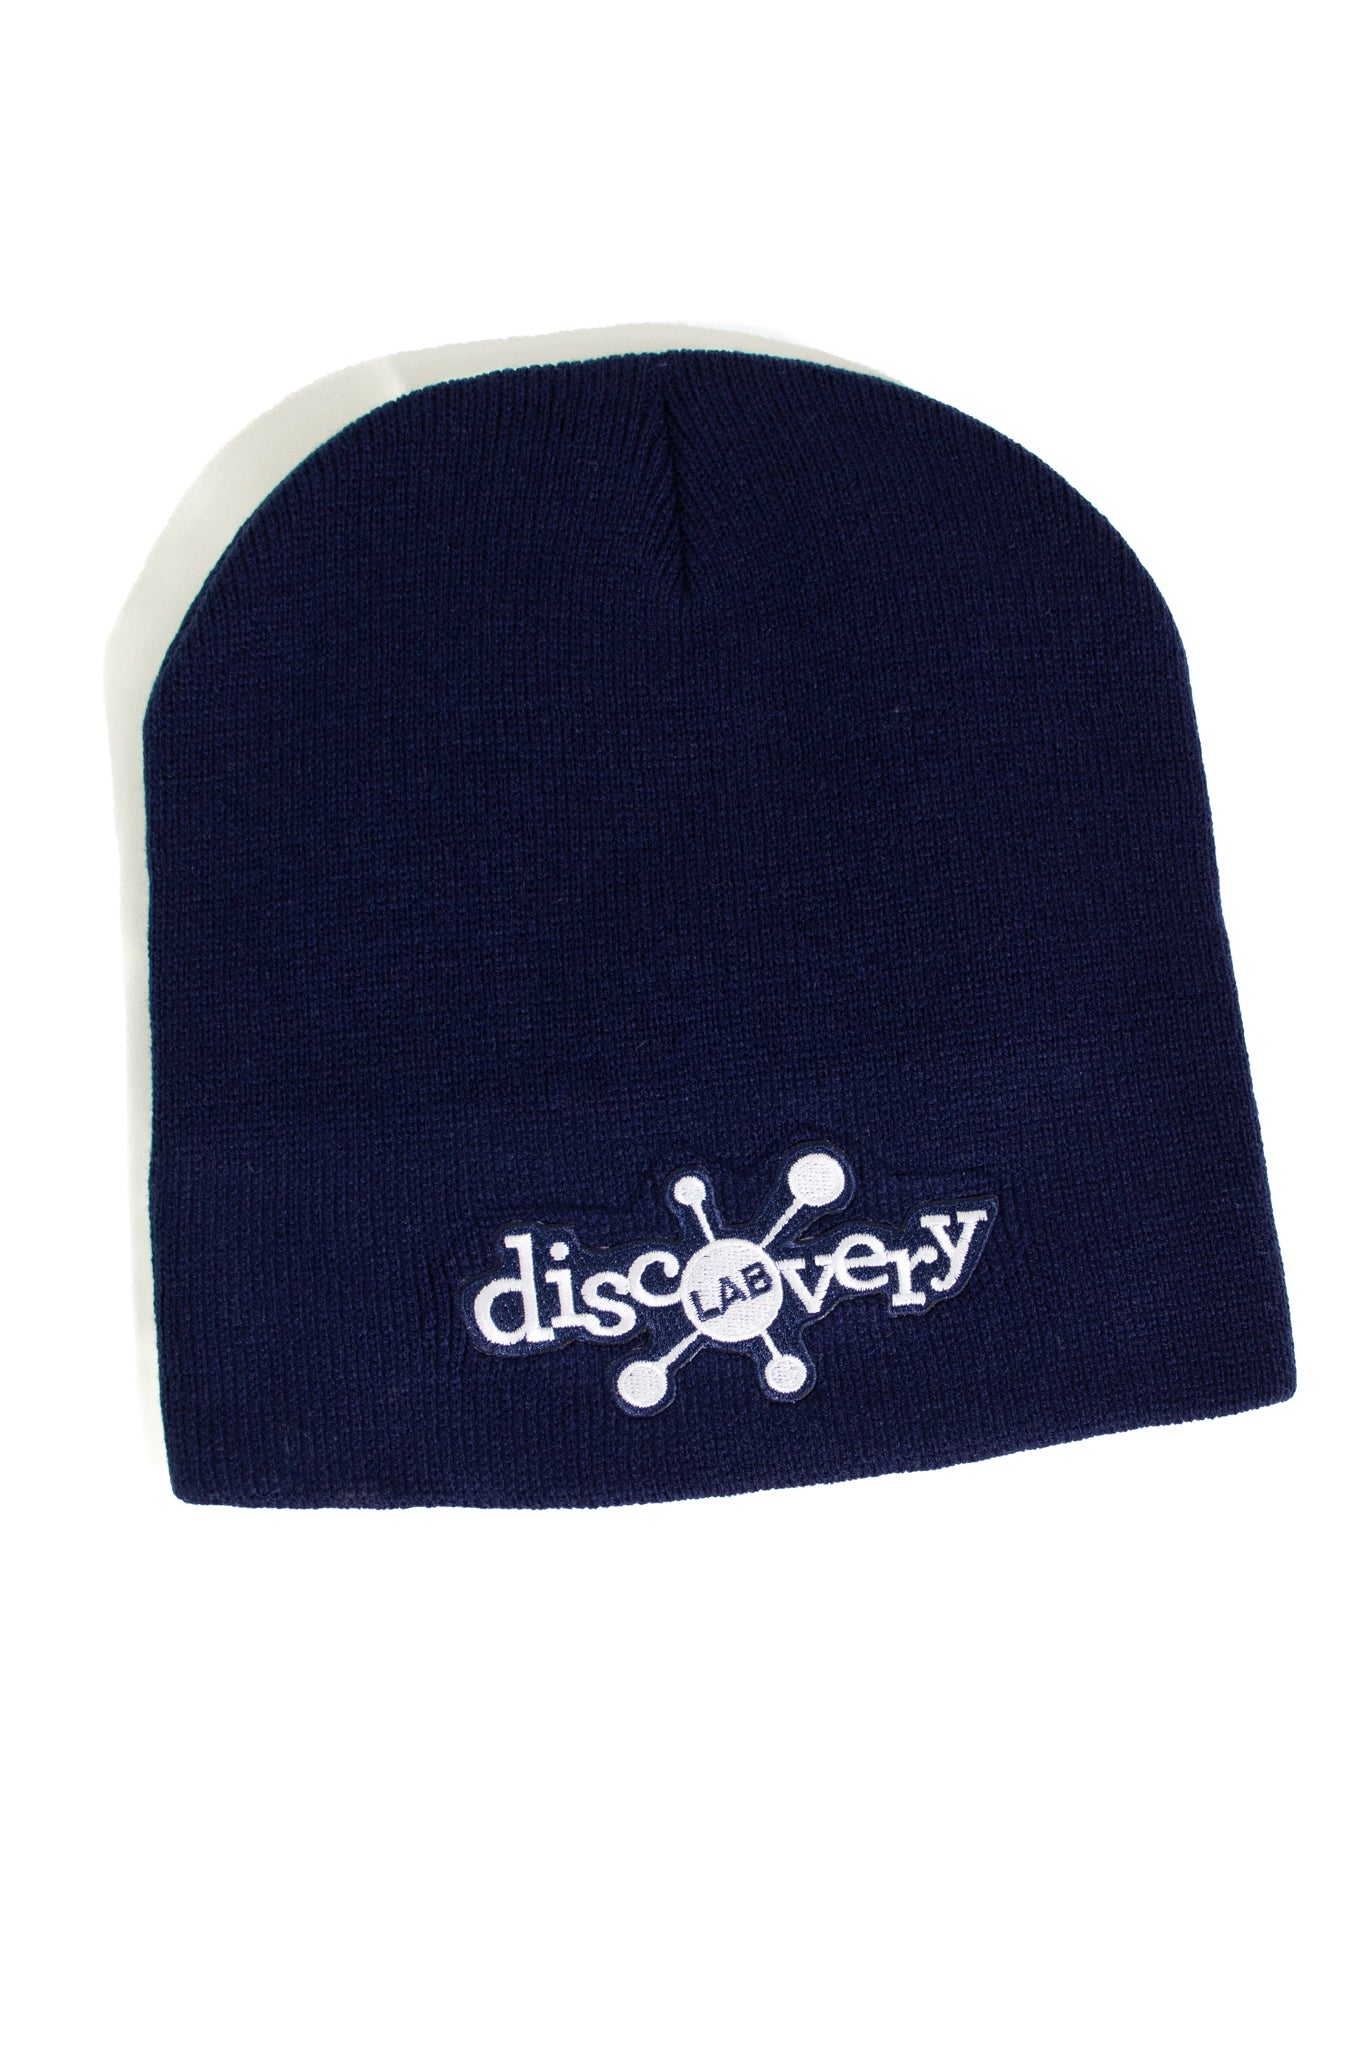 Discovery Lab Beanie - Navy - Stemcell Science Shop